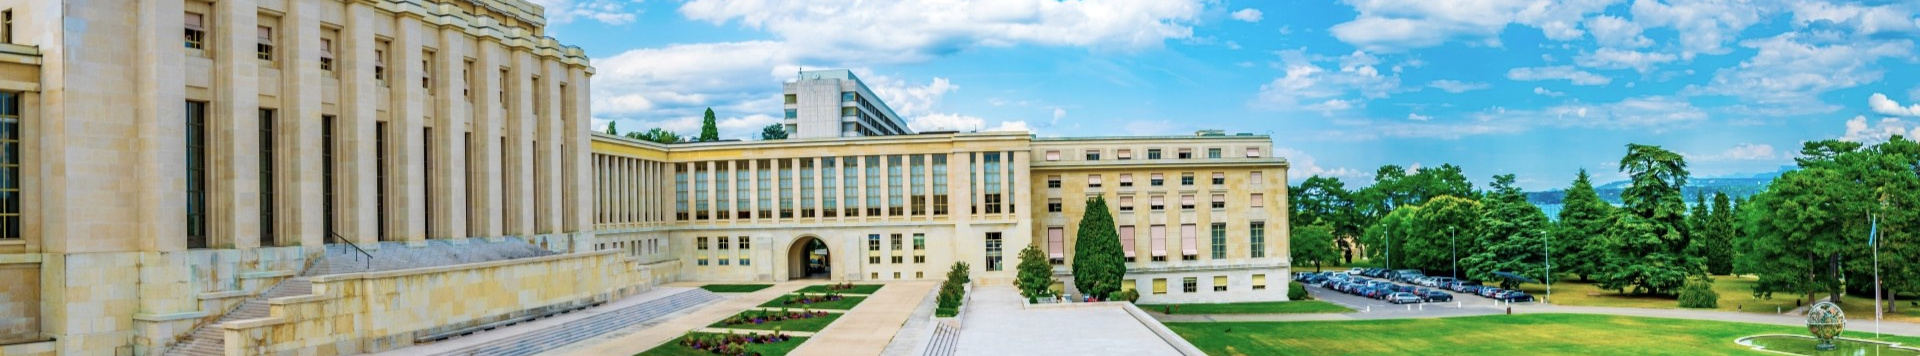 The old buildings of the Palais des Nations